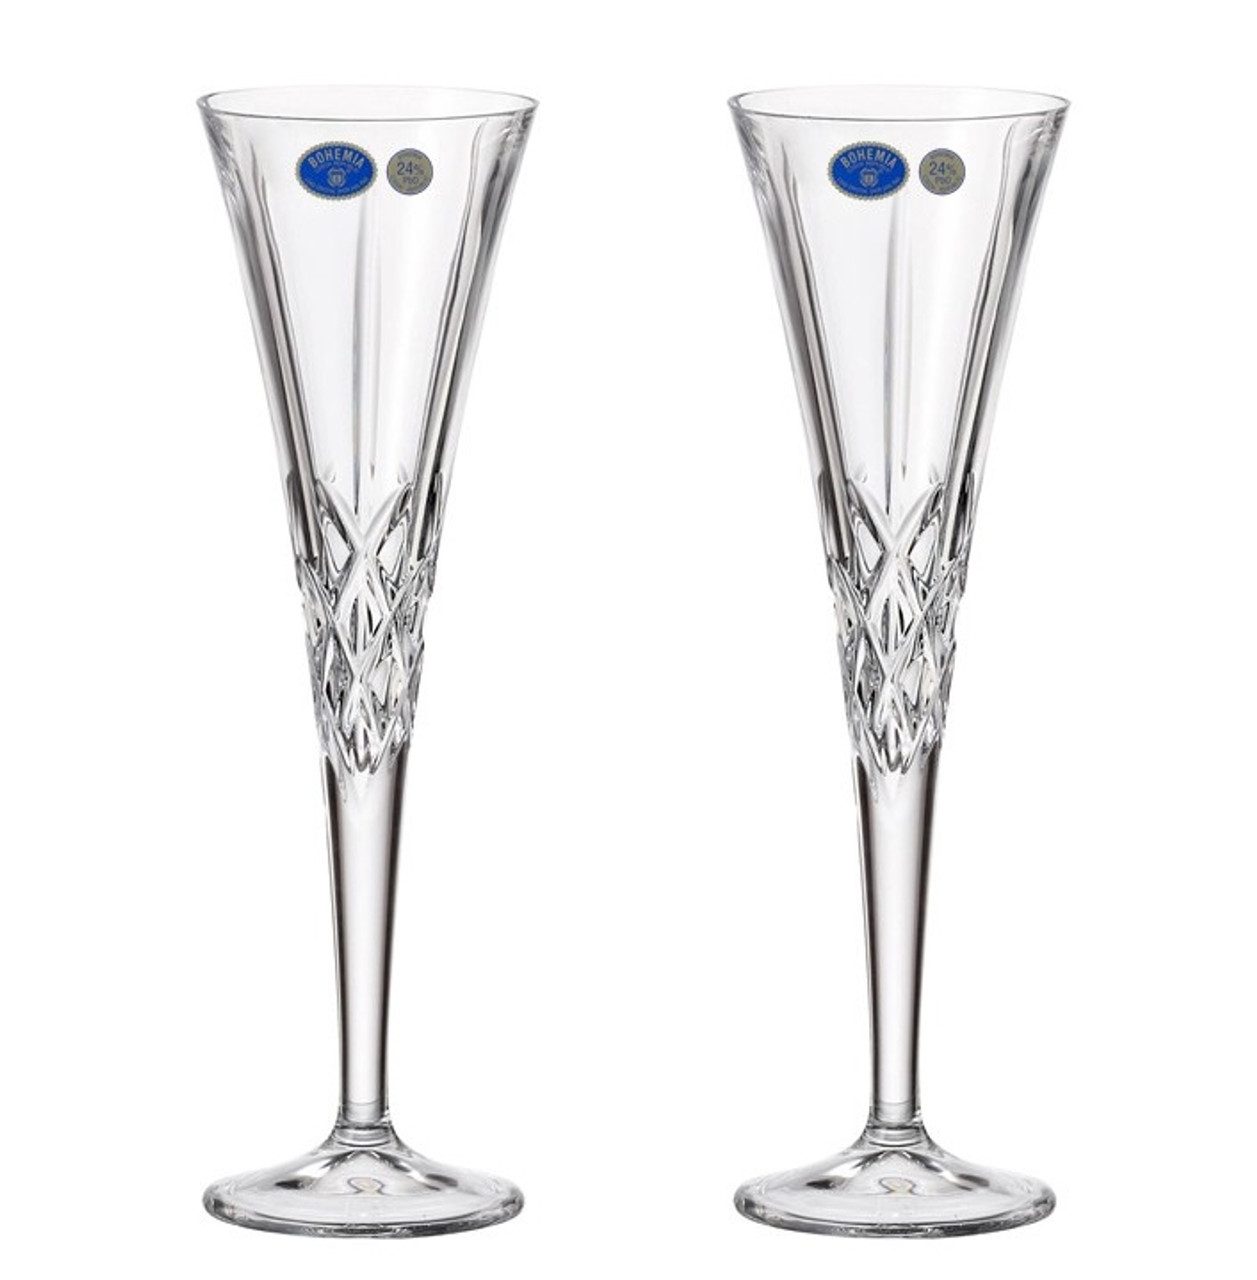 https://cdn11.bigcommerce.com/s-9mnzpxwffi/images/stencil/1280x1280/products/576/3119/0-Heavy_Crystal_Trumpet_Champagne_Flutes__23841.1654356164.jpg?c=2